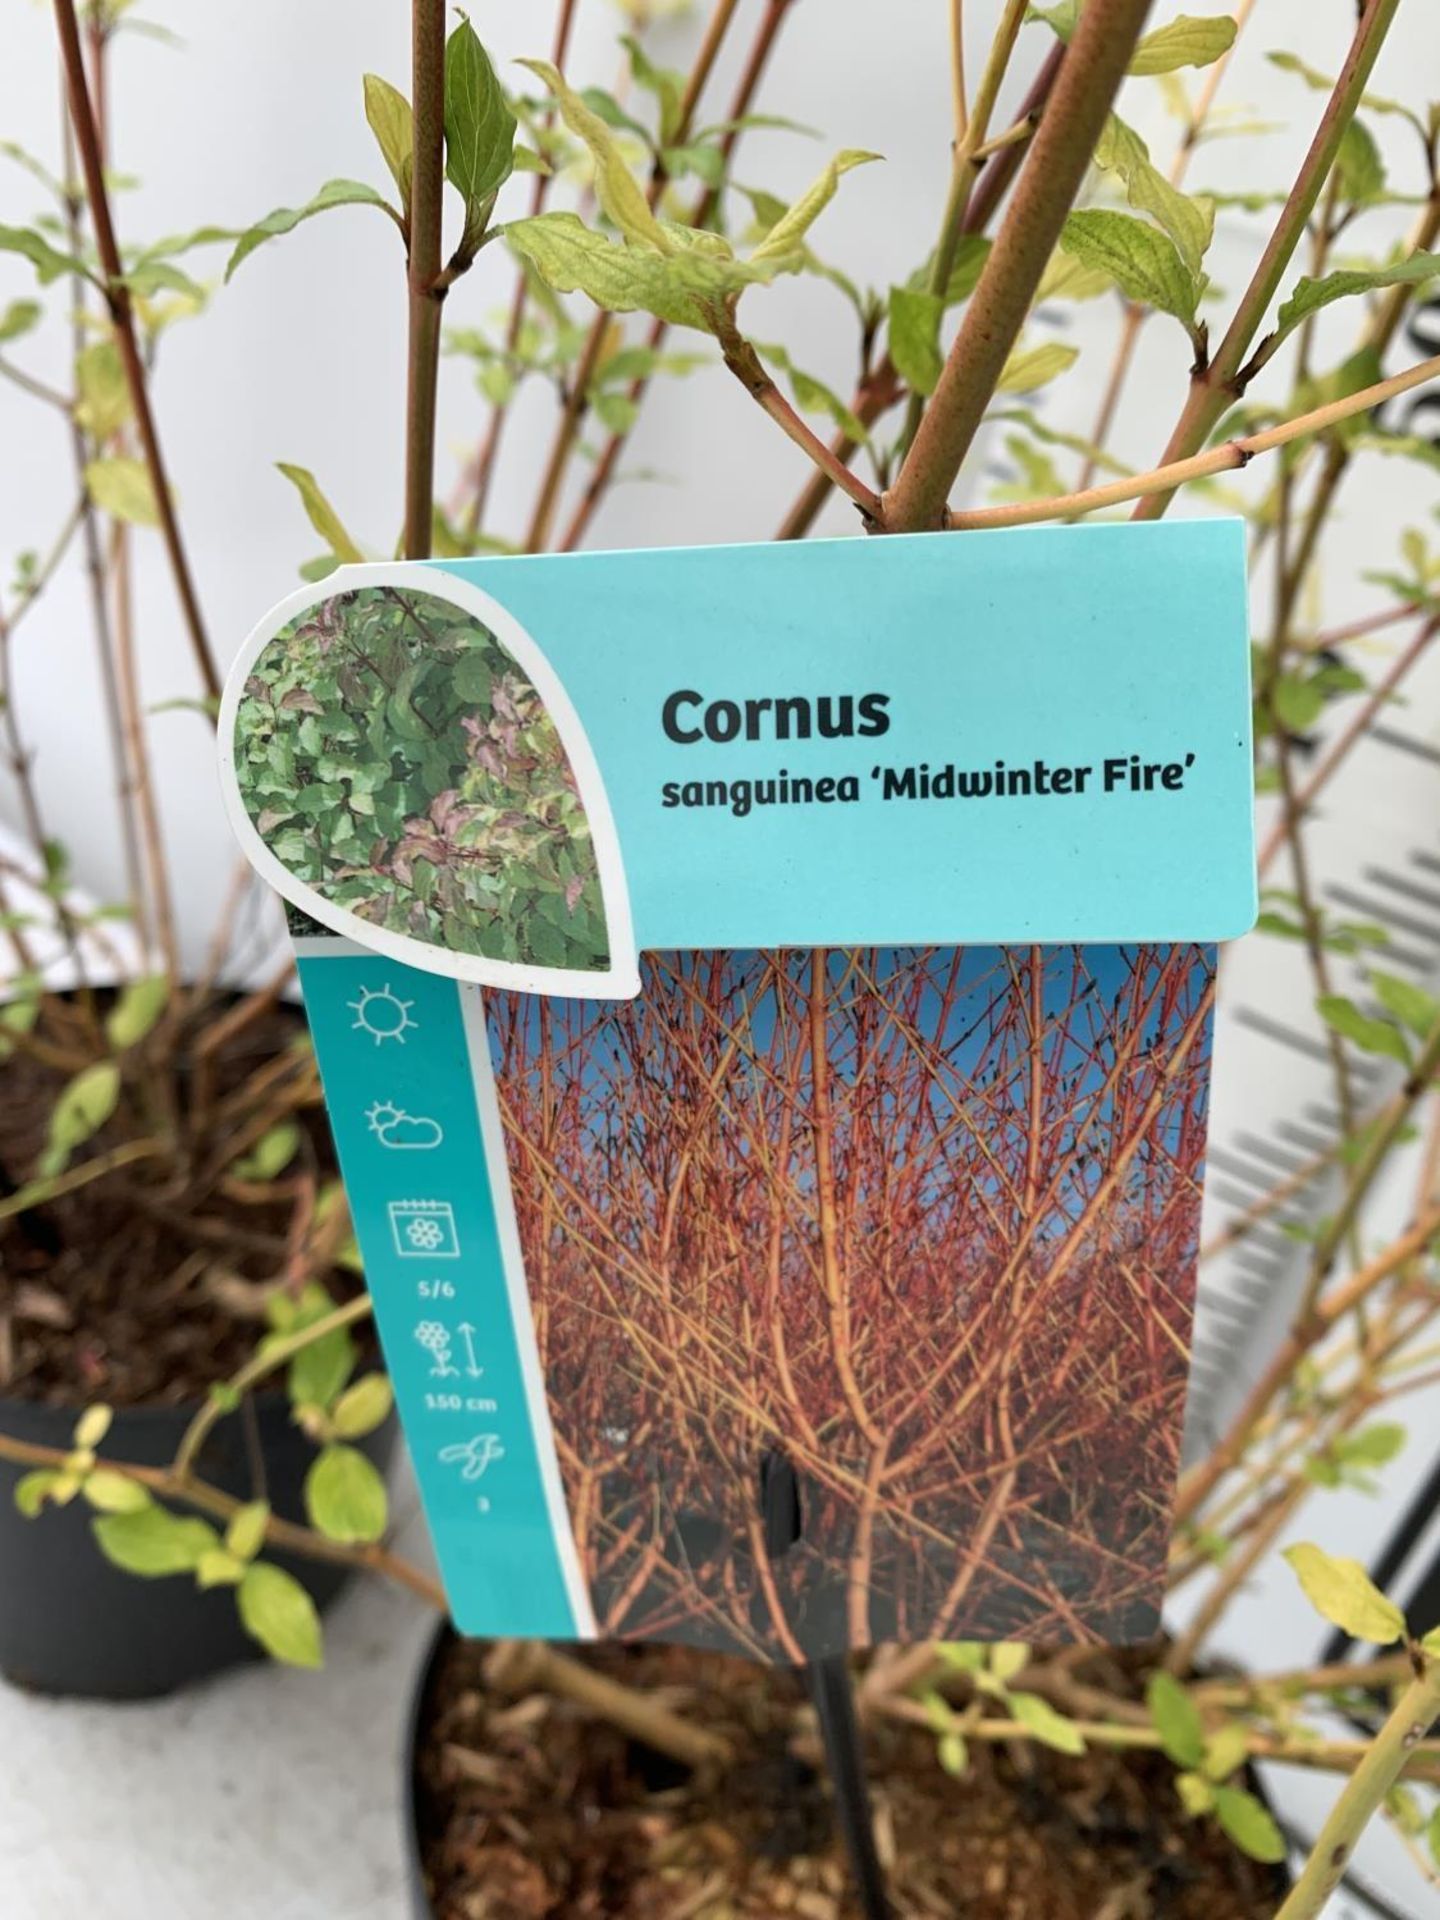 TWO CORNUS SANGUINEA 'MIDWINTER FIRE' IN 4 LTR POTS APPROX 90CM IN HEIGHT PLUS VAT TO BE SOLD FOR - Bild 5 aus 6